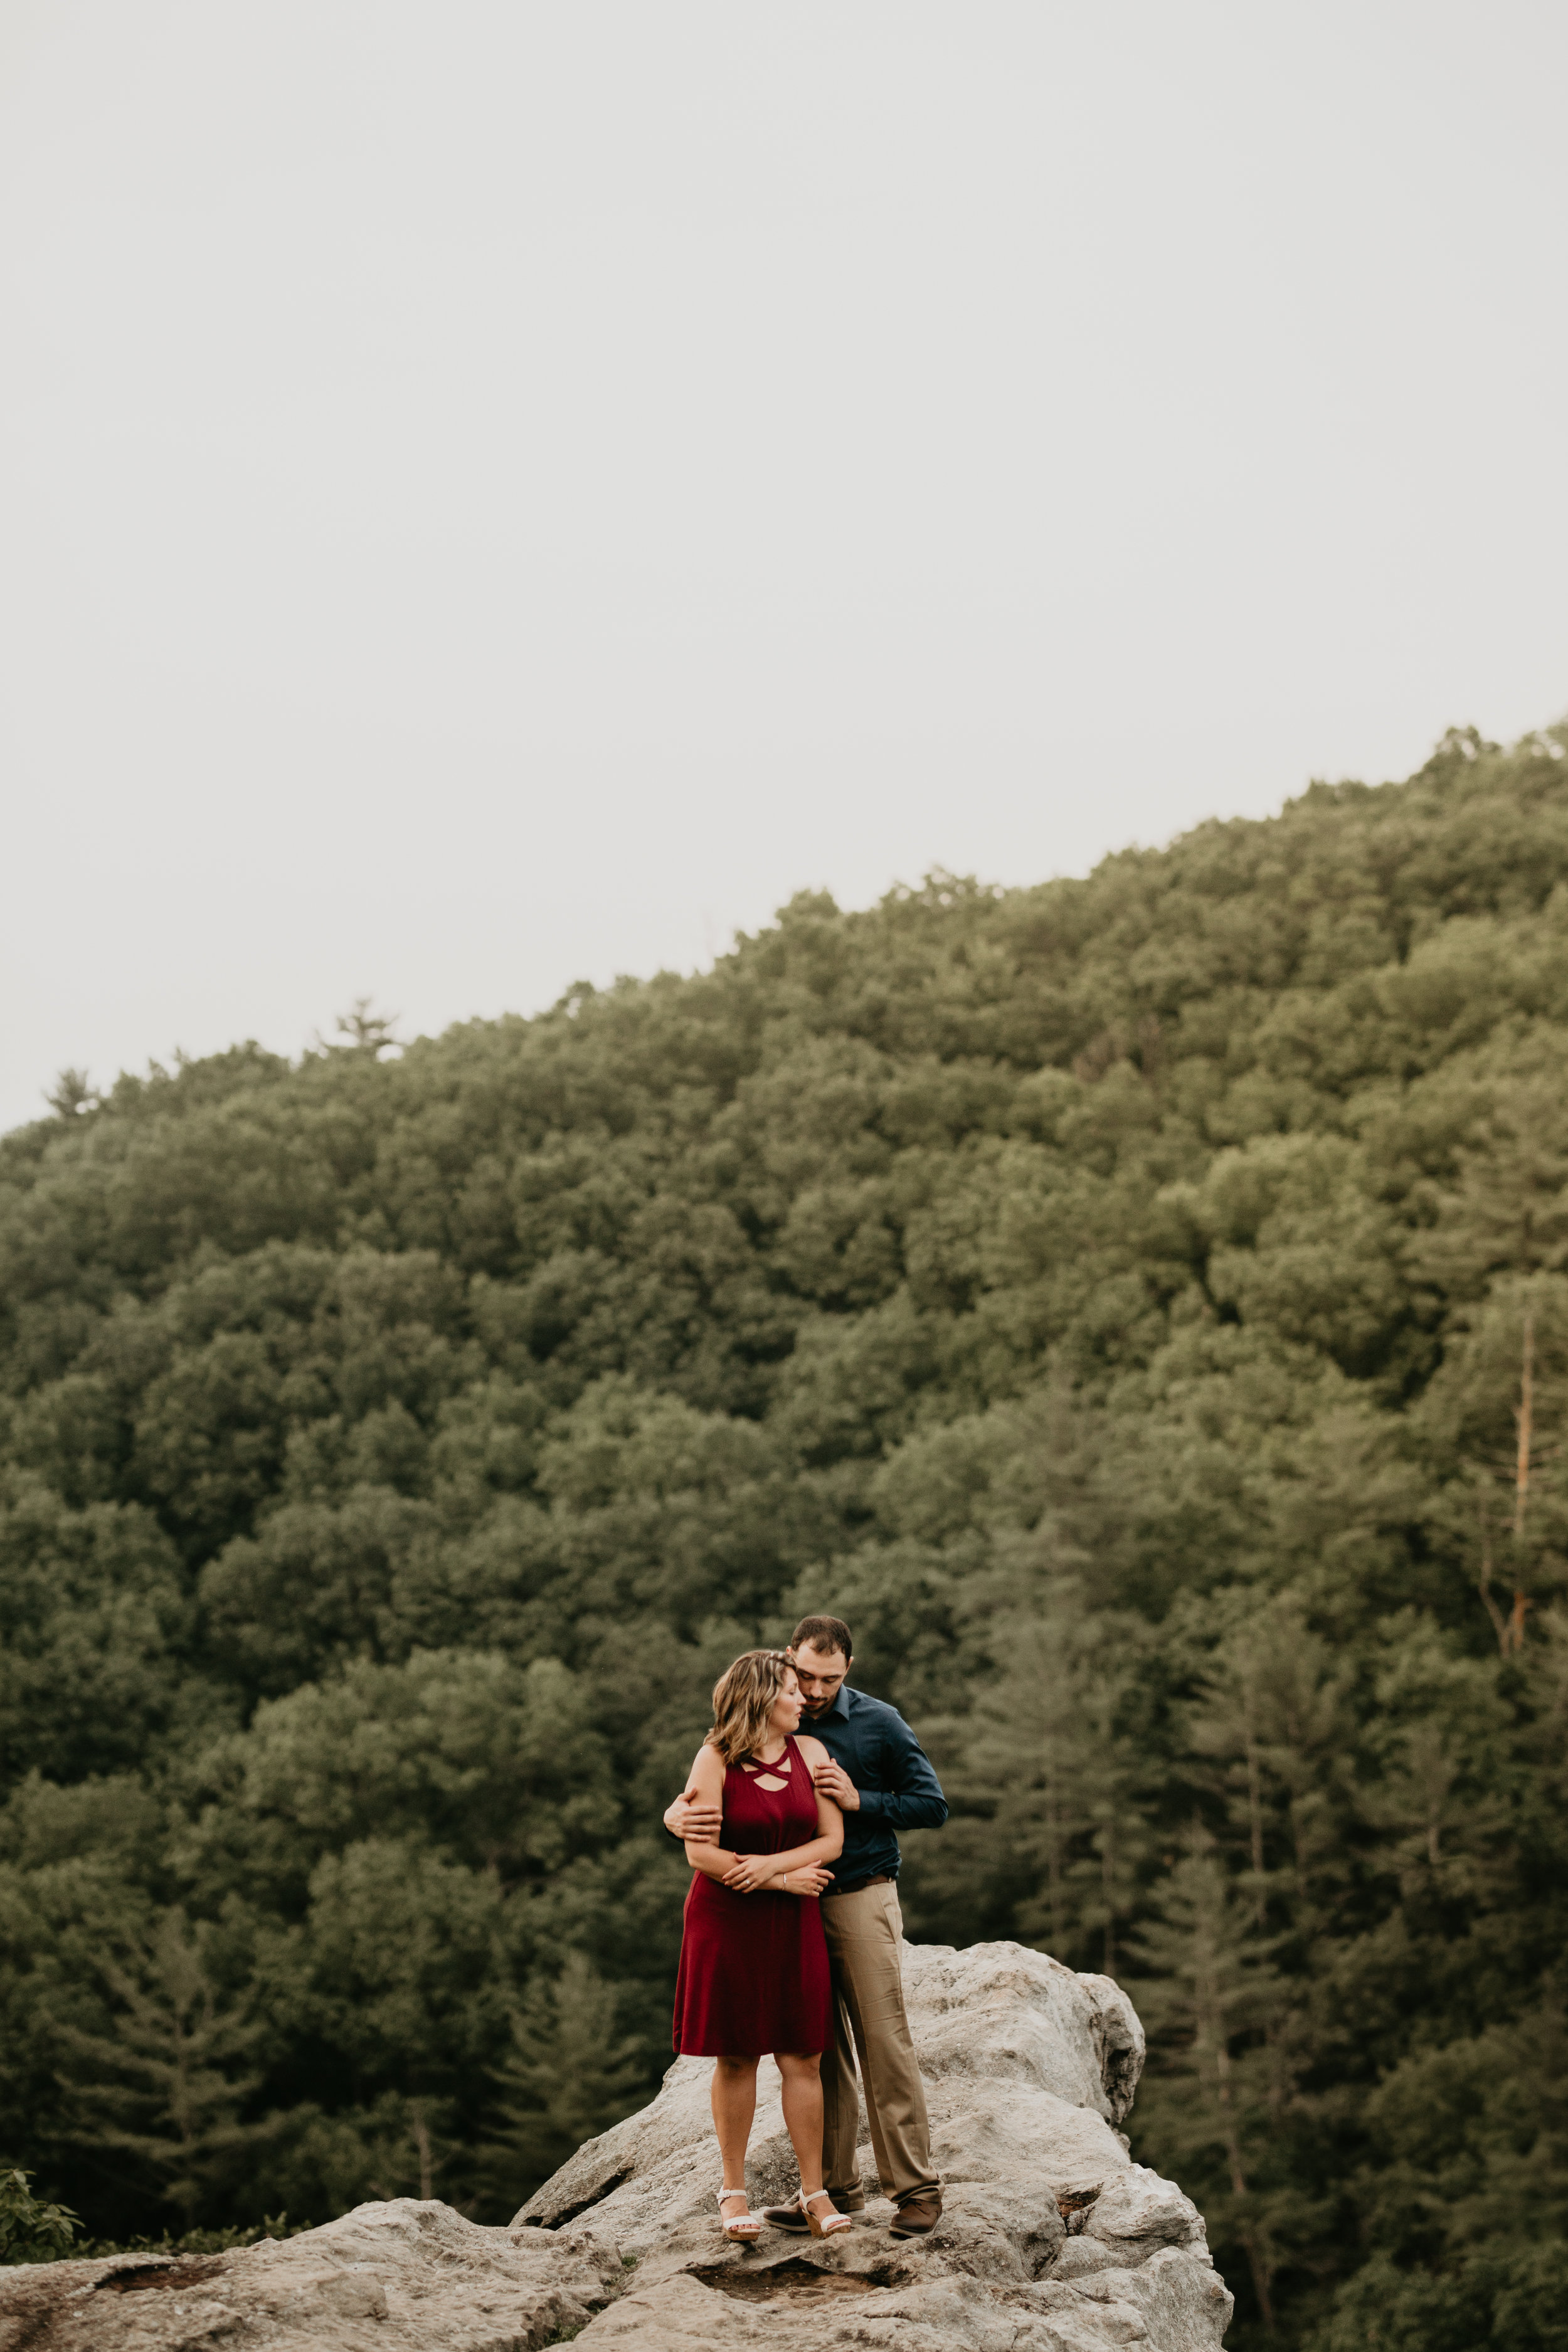 Nicole-Daacke-Photography-rock-state-park-overlook-king-queen-seat-maryland-hiking-adventure-engagement-session-photos-portraits-summer-bel-air-dog-engagement-session-23.jpg